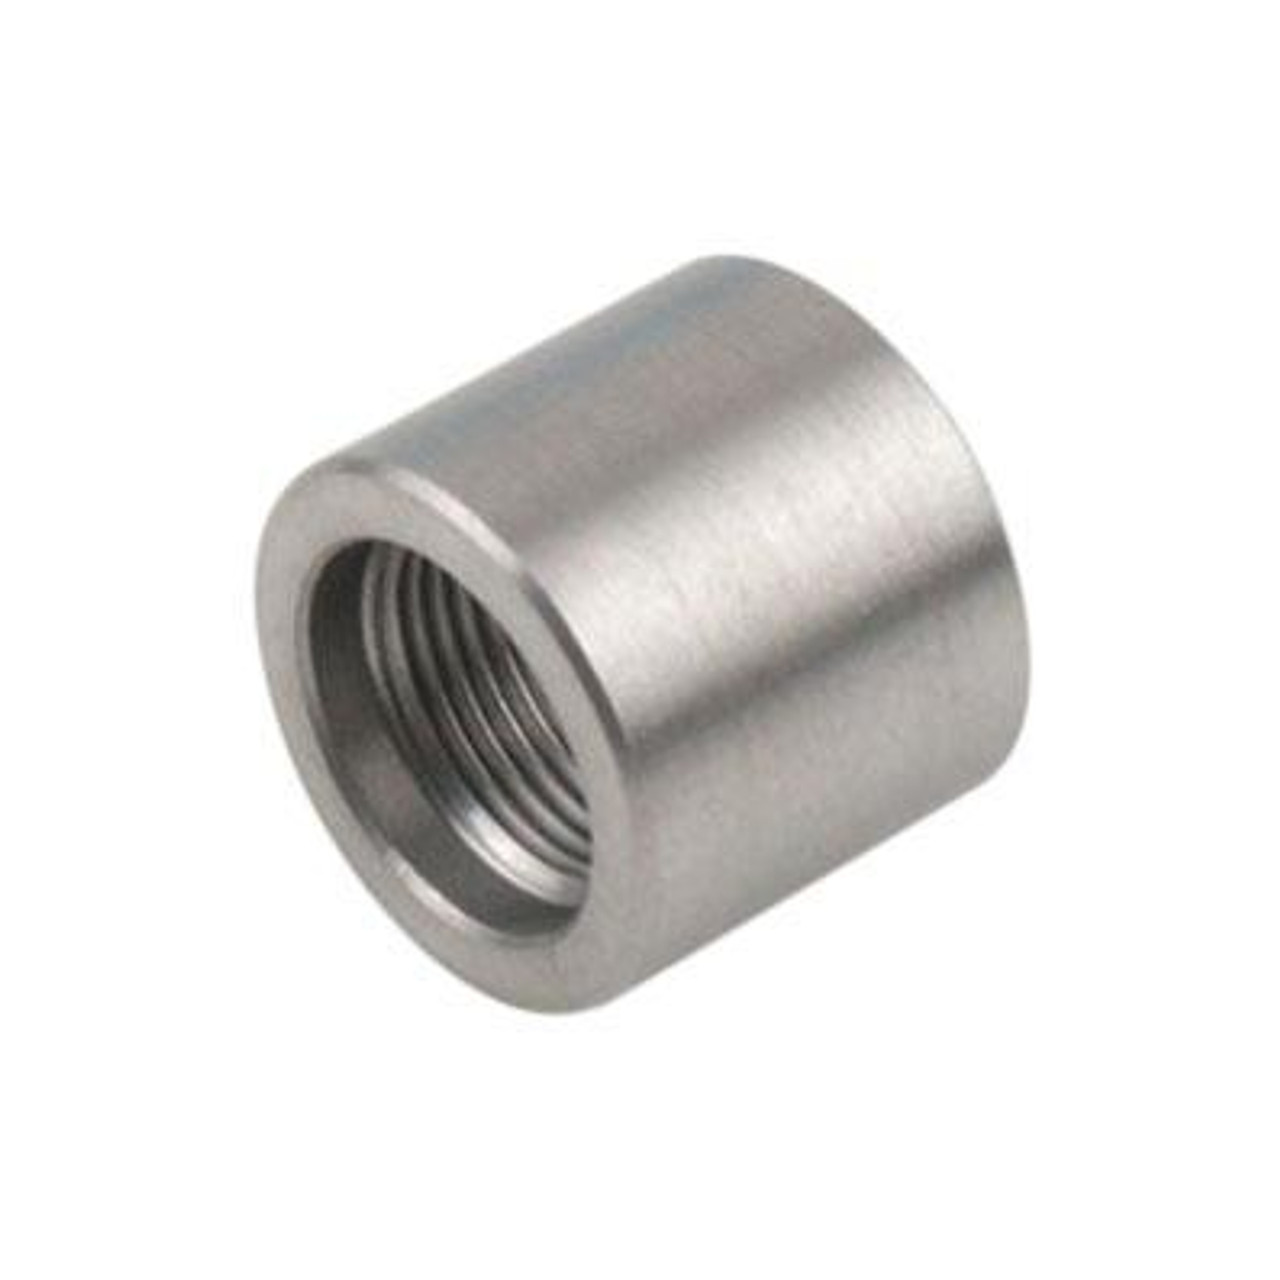 Smooth Muzzle Thread Protector (Stainless)